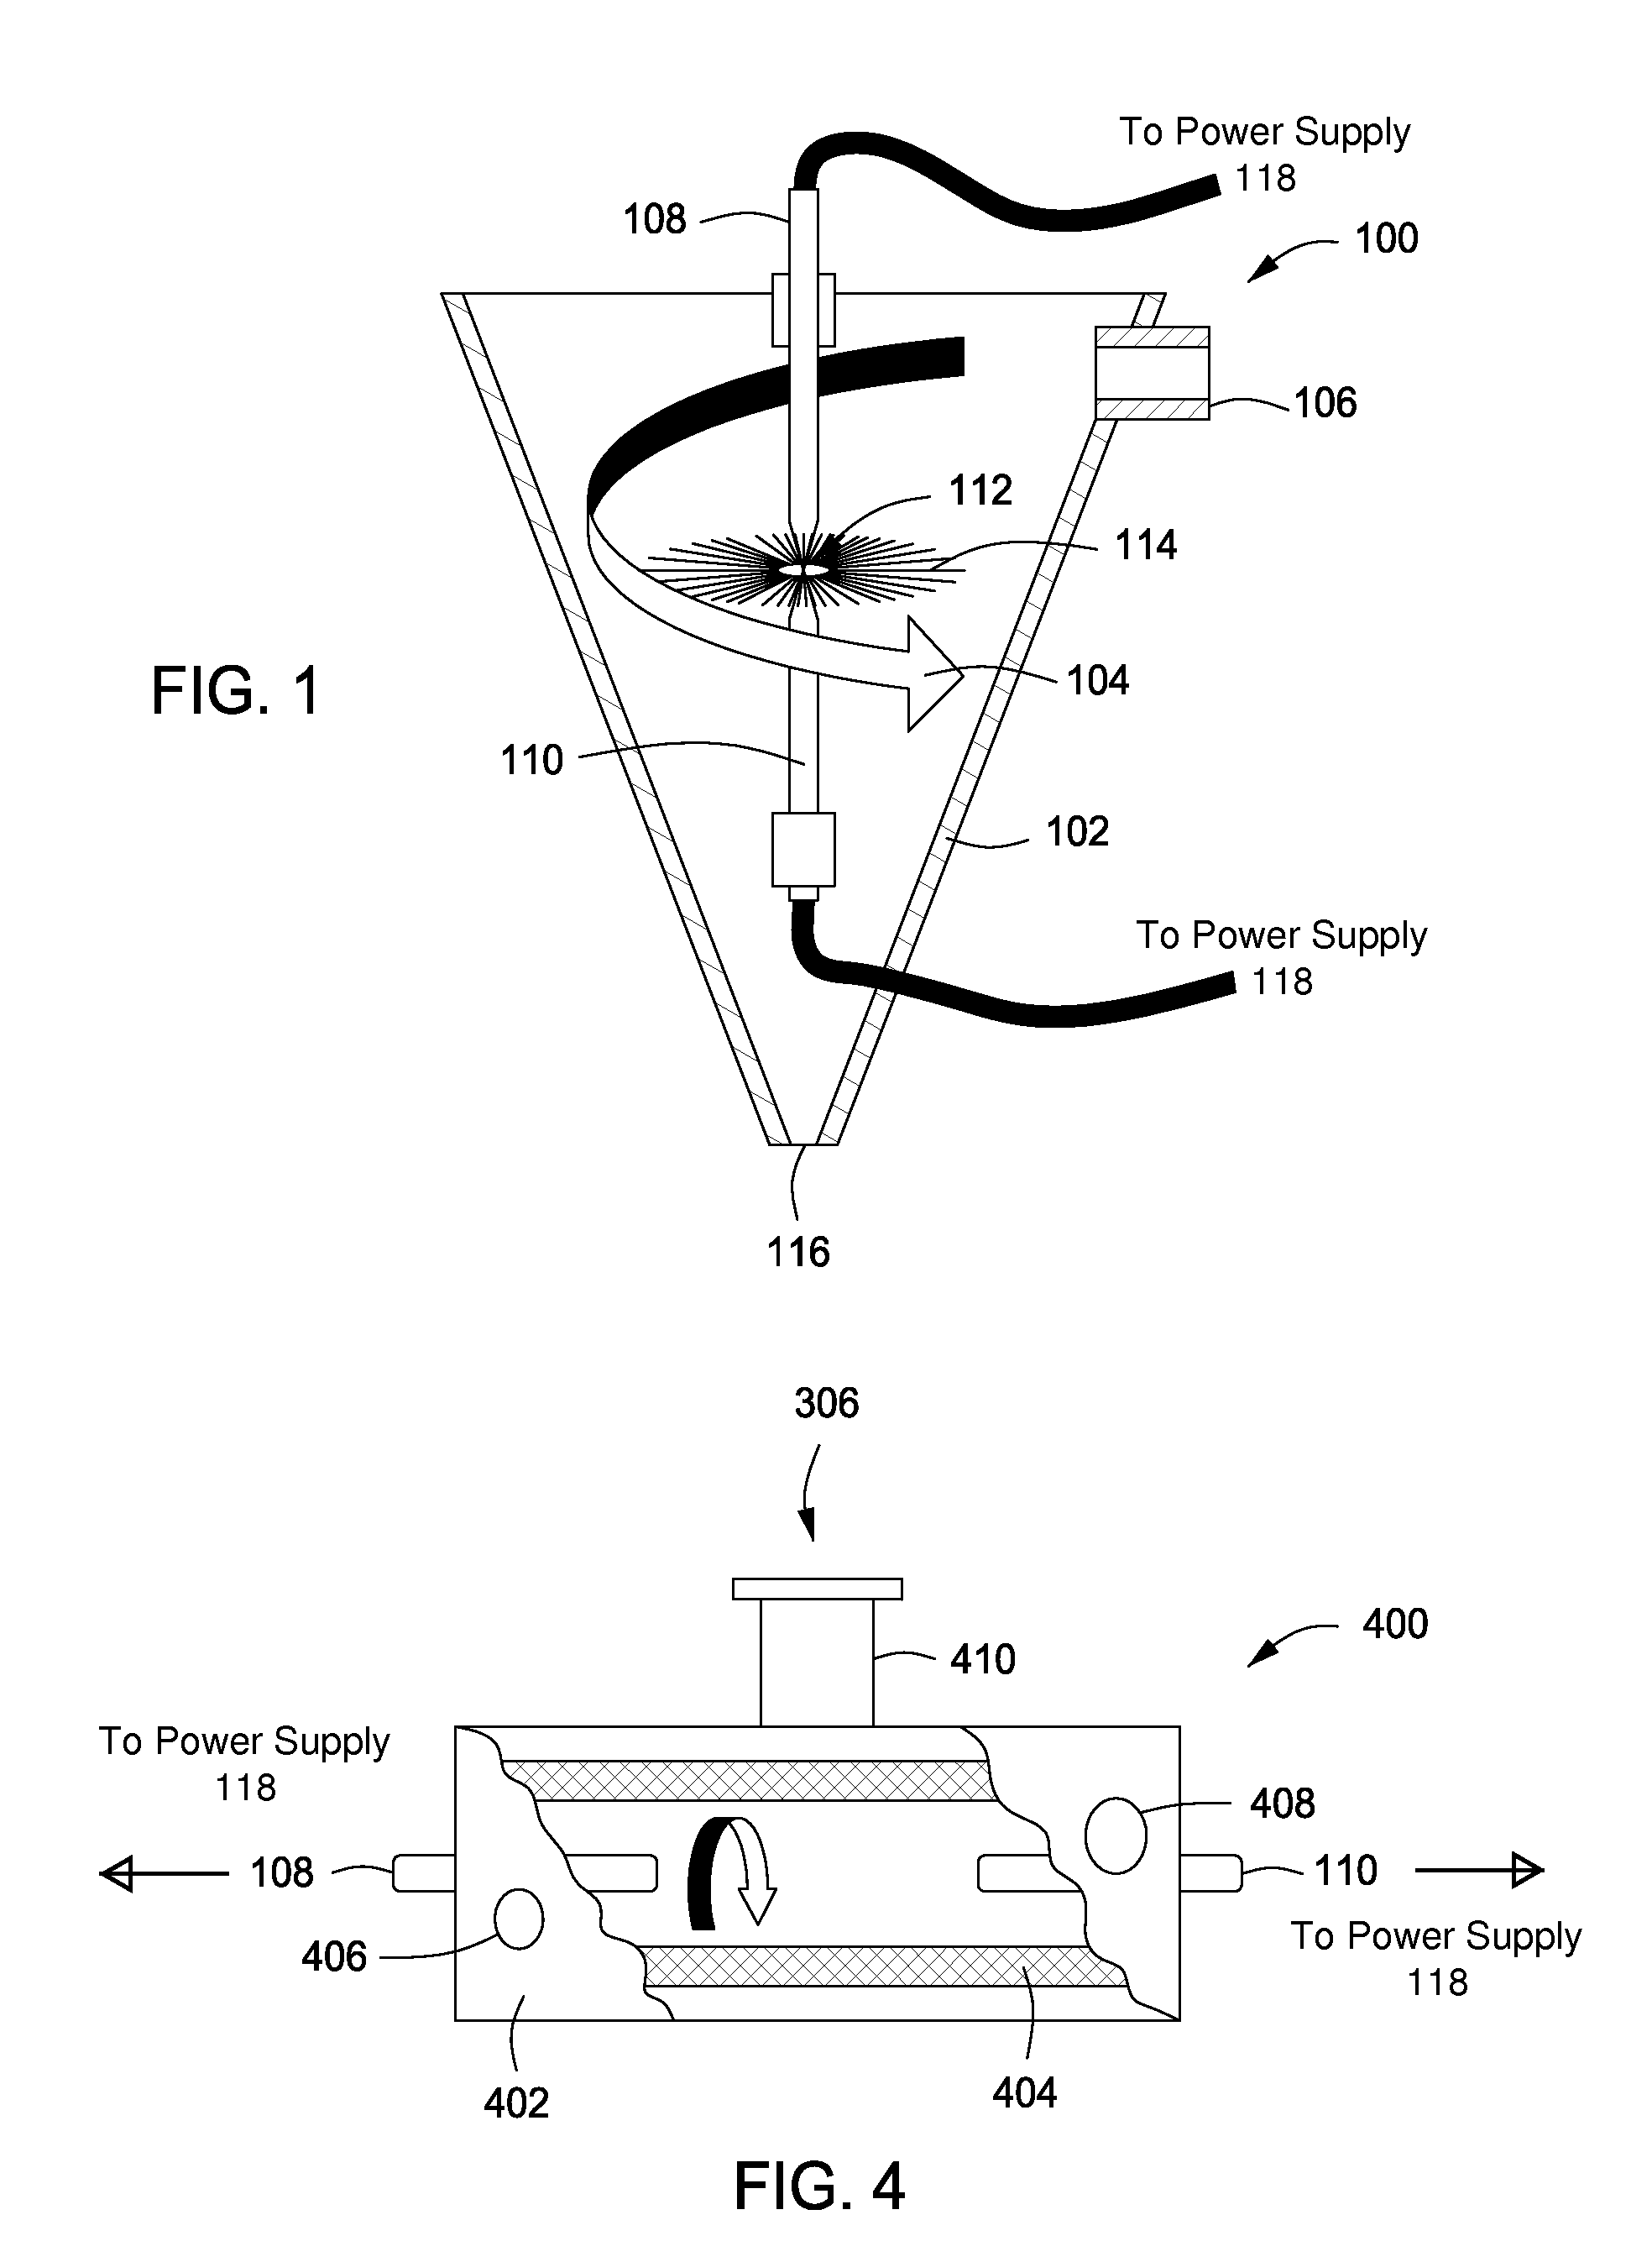 Method for treating a substance with wave energy from an electrical arc and a second source